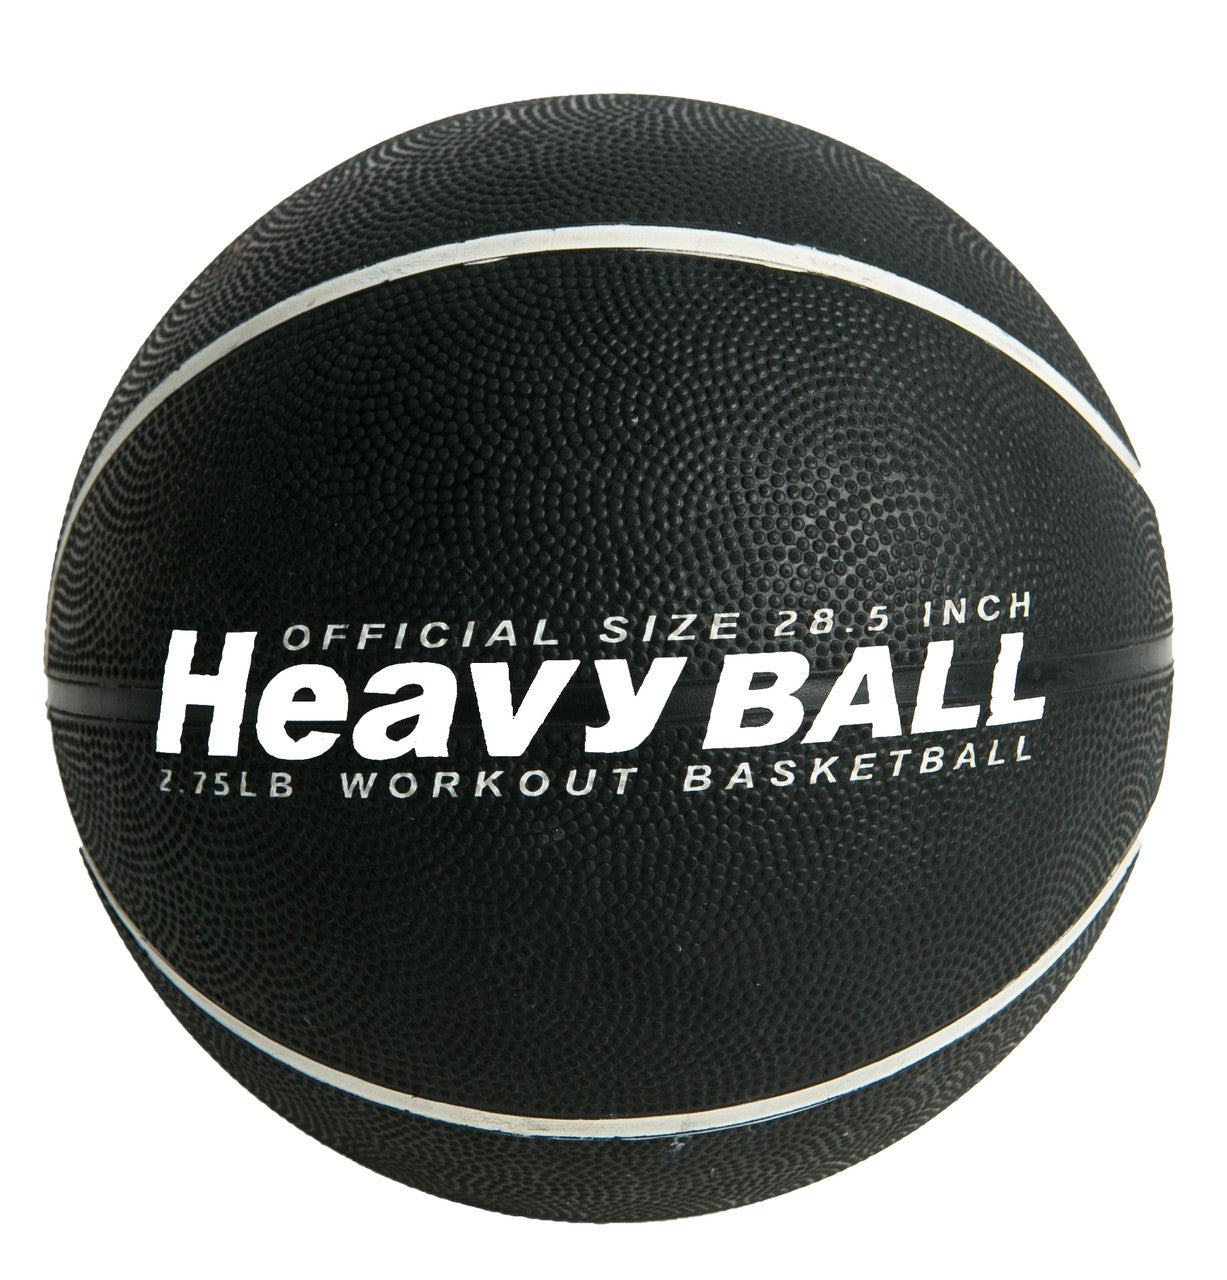 One weighted basketball.  Choose from 29.5" or 28.5"